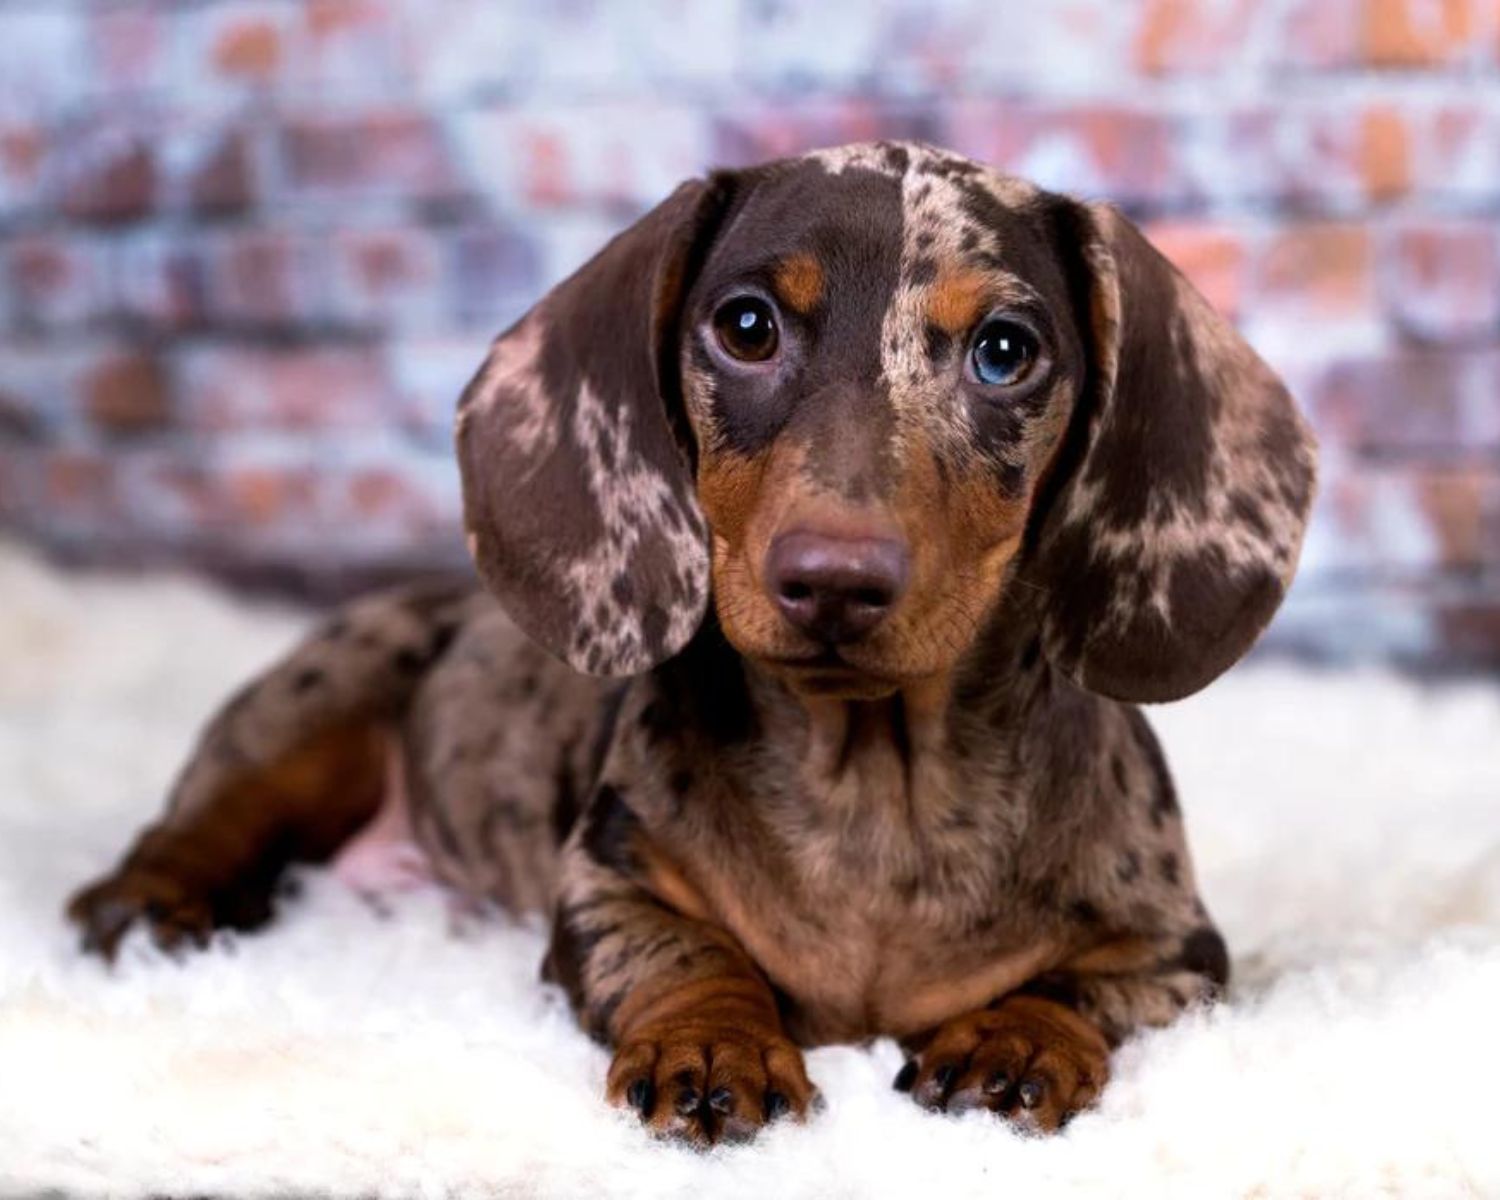 Meet the Dachshund: Personality, Health, and Care